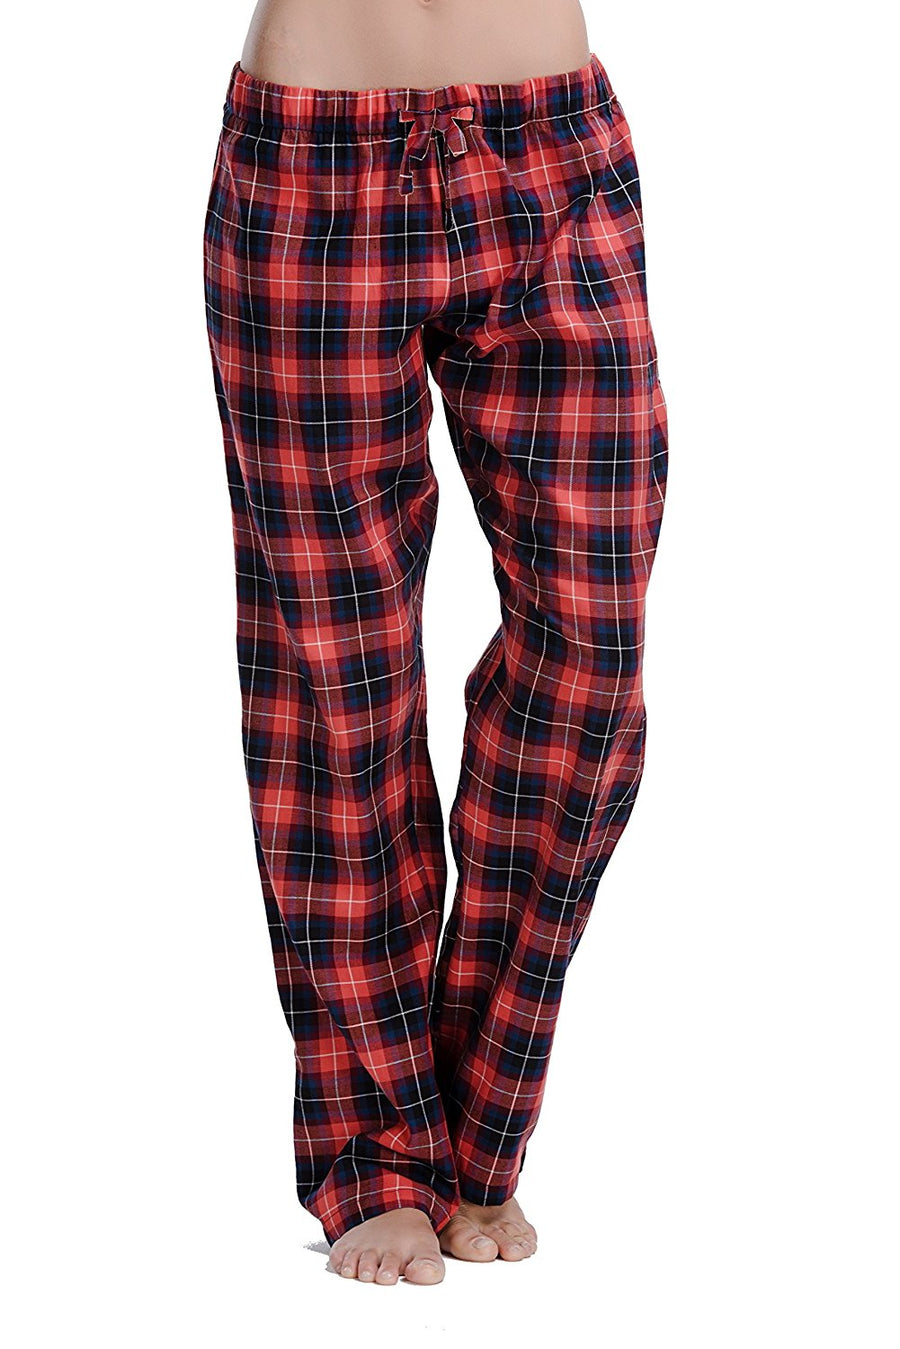 Buy Bottoms Out Women's Cotton Flannel Pajama Pant, Pink/White, Medium at